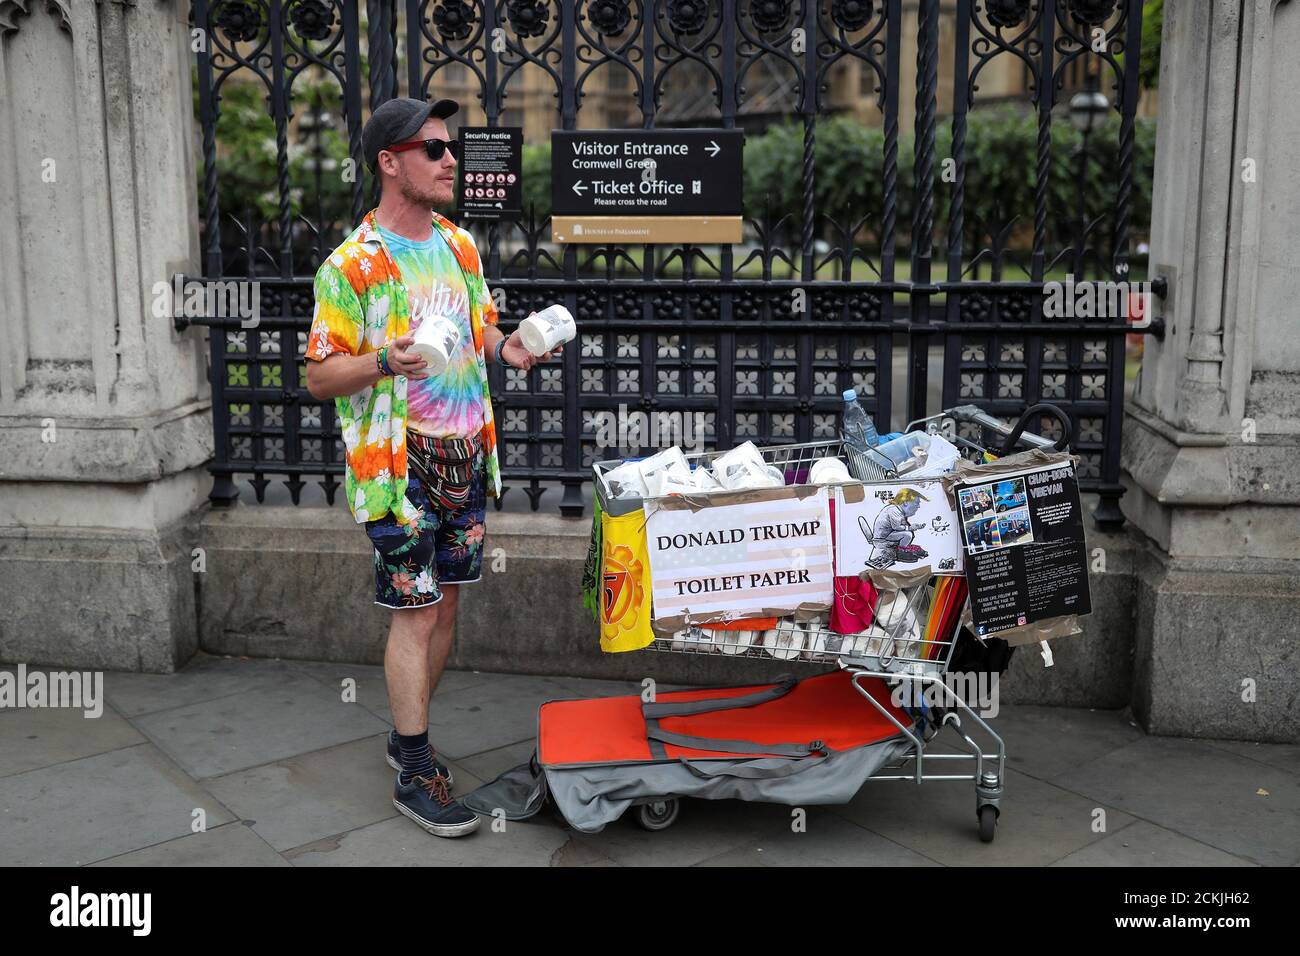 A man raising mental health awareness campaigner, sells Donald Trump themed toilet paper rolls outside the Houses of Parliament in London, Britain July 9, 2019. REUTERS/Simon Dawson Stock Photo